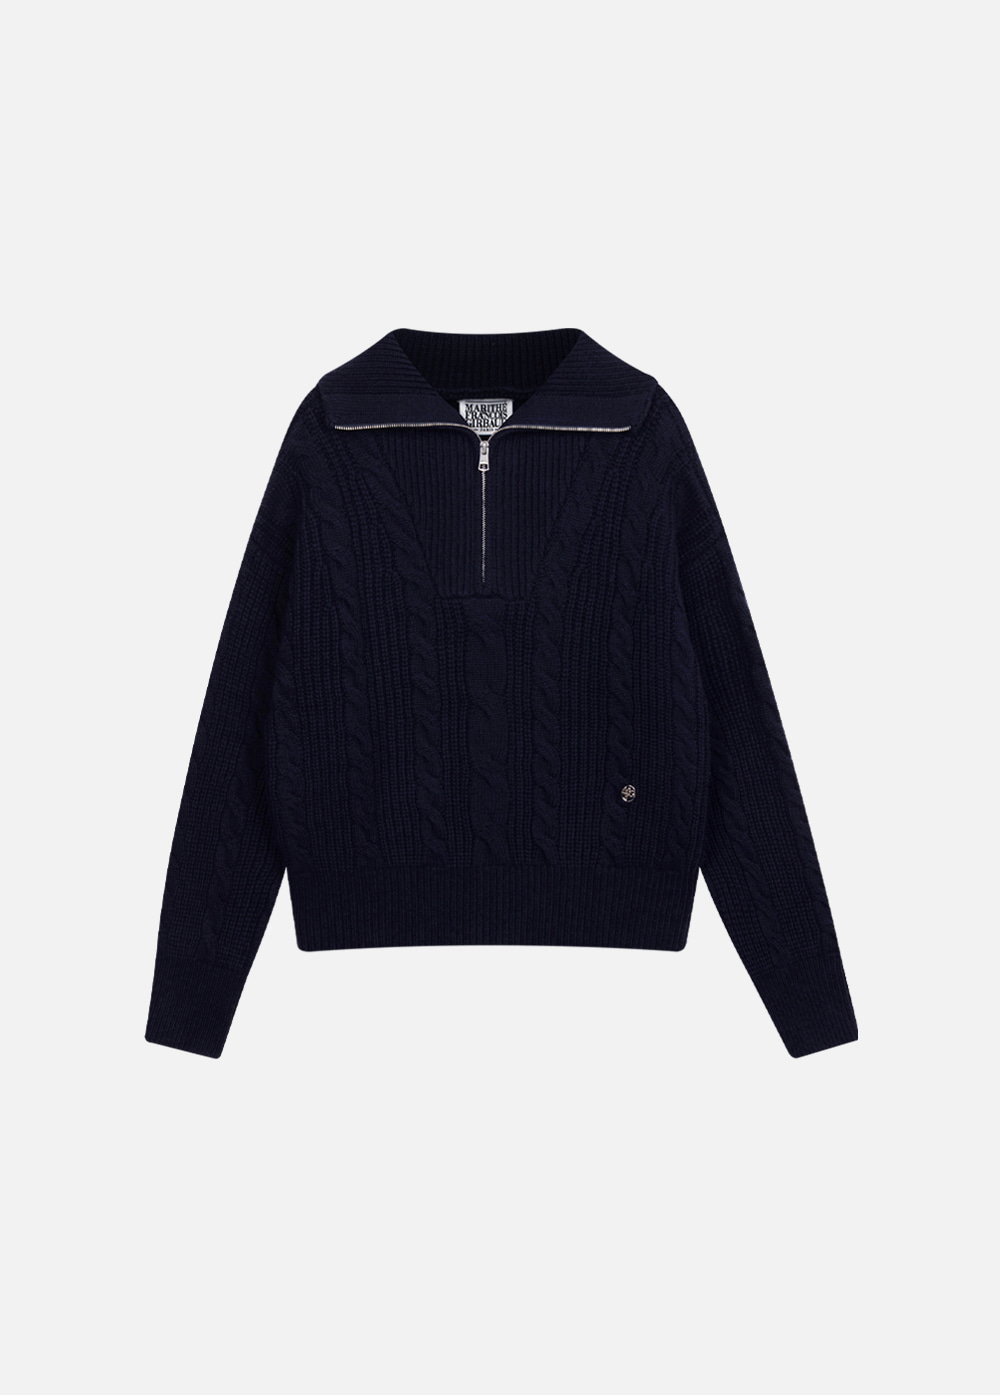 W CABLE HALF ZIPUP PULLOVER KNIT navy